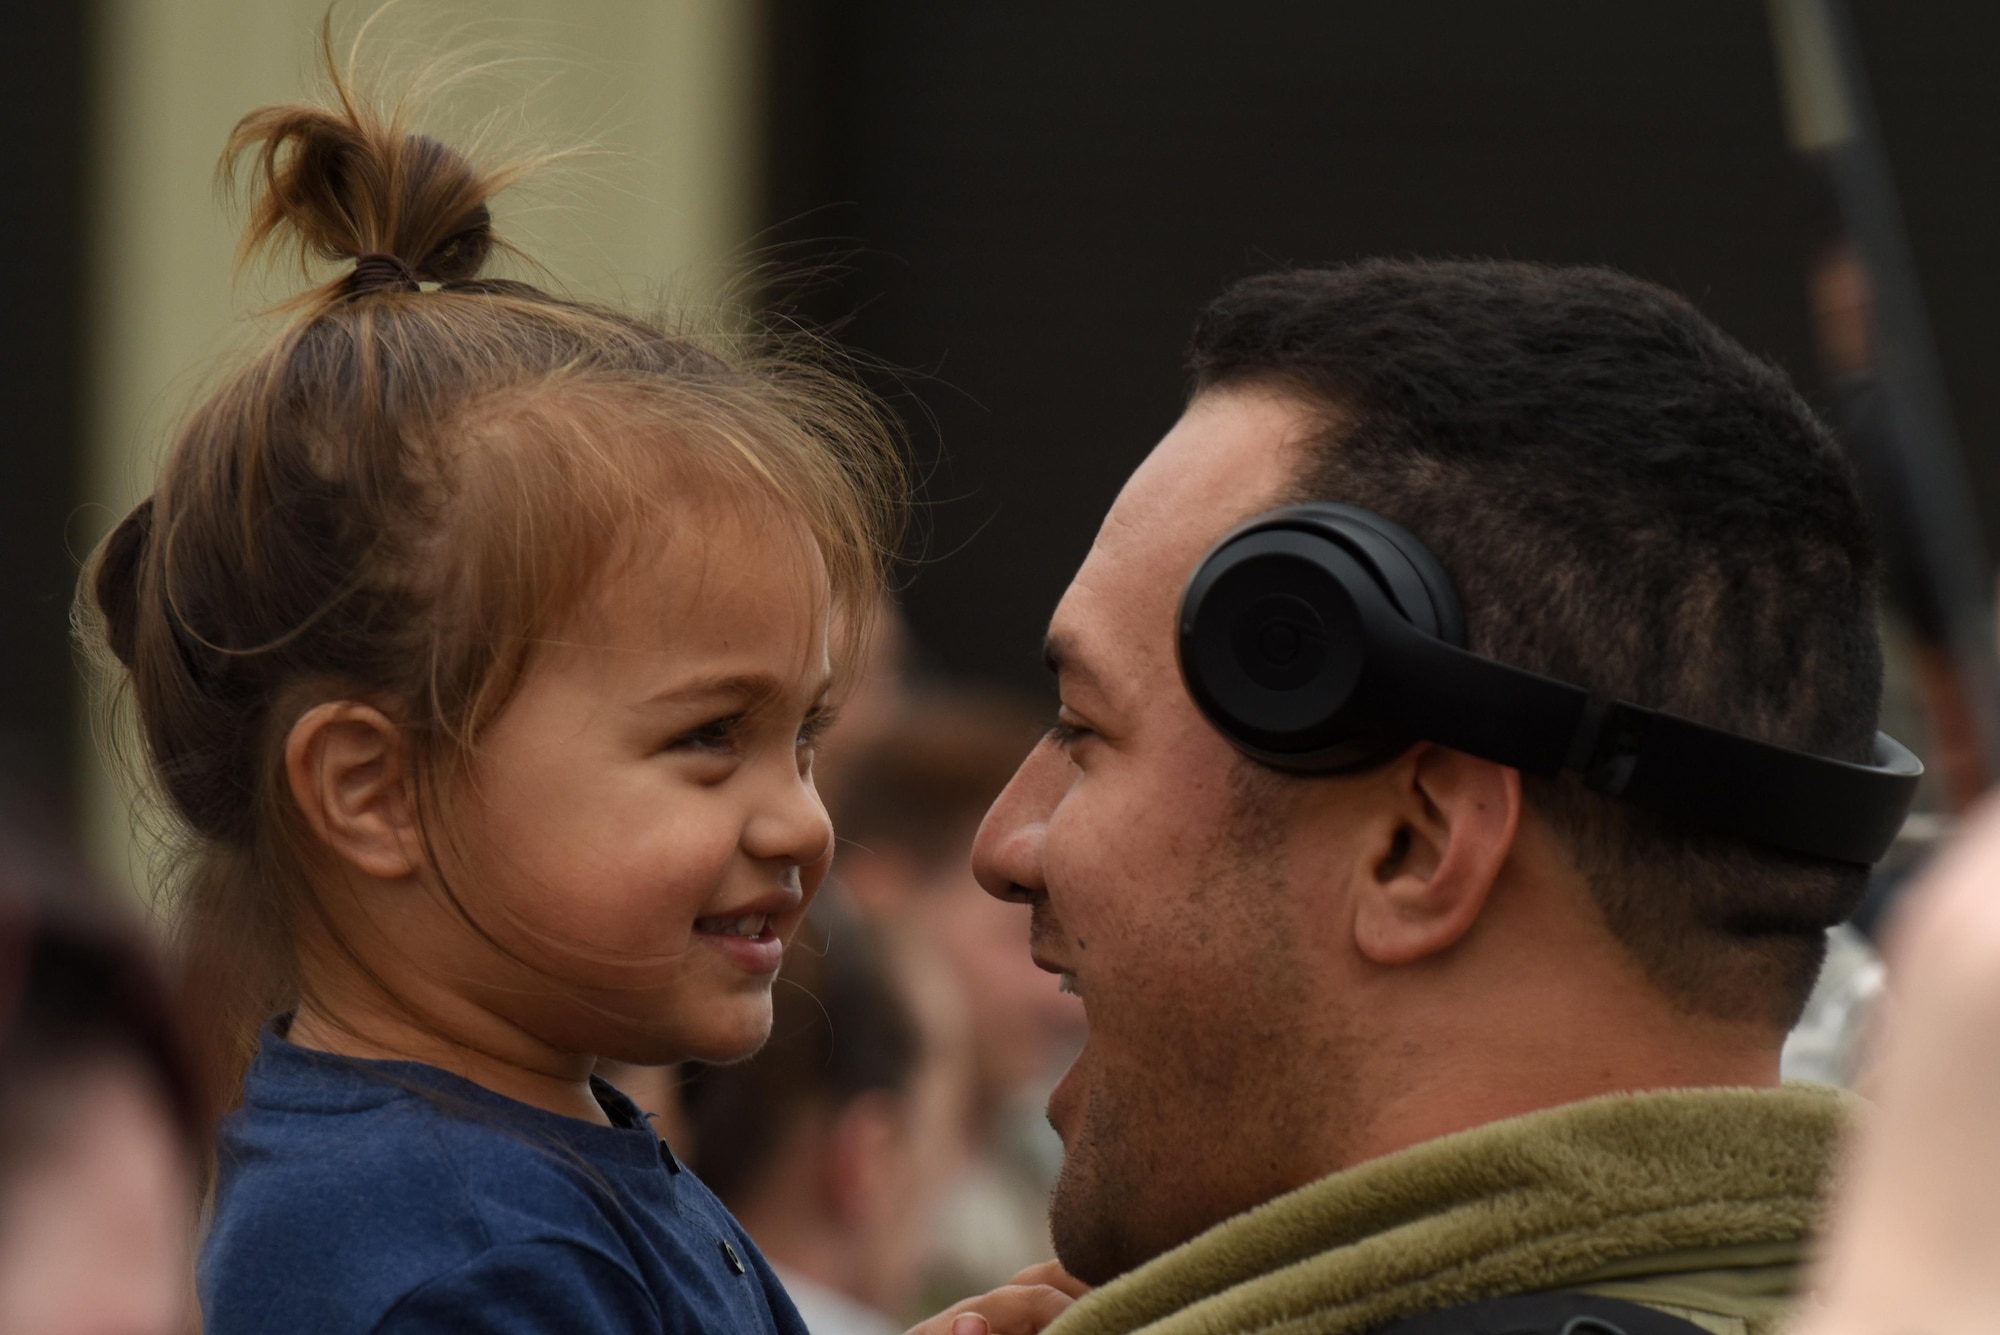 A 48th Fighter Wing Airman embraces a family member at Royal Air Force Lakenheath, England, after returning from a deployment Oct. 11. While deployed as the 492nd Expeditionary Fighter Squadron at the 332nd Air Expeditionary Wing, the 492nd FS “Bolars” completed nearly 11,000 flying hours and over 2,000 missions while delivering nearly 4,500 precision-guided munitions in support of U.S. Central Command operations. (U.S. Air Force photo/Airman 1st Class Eli Chevalier)